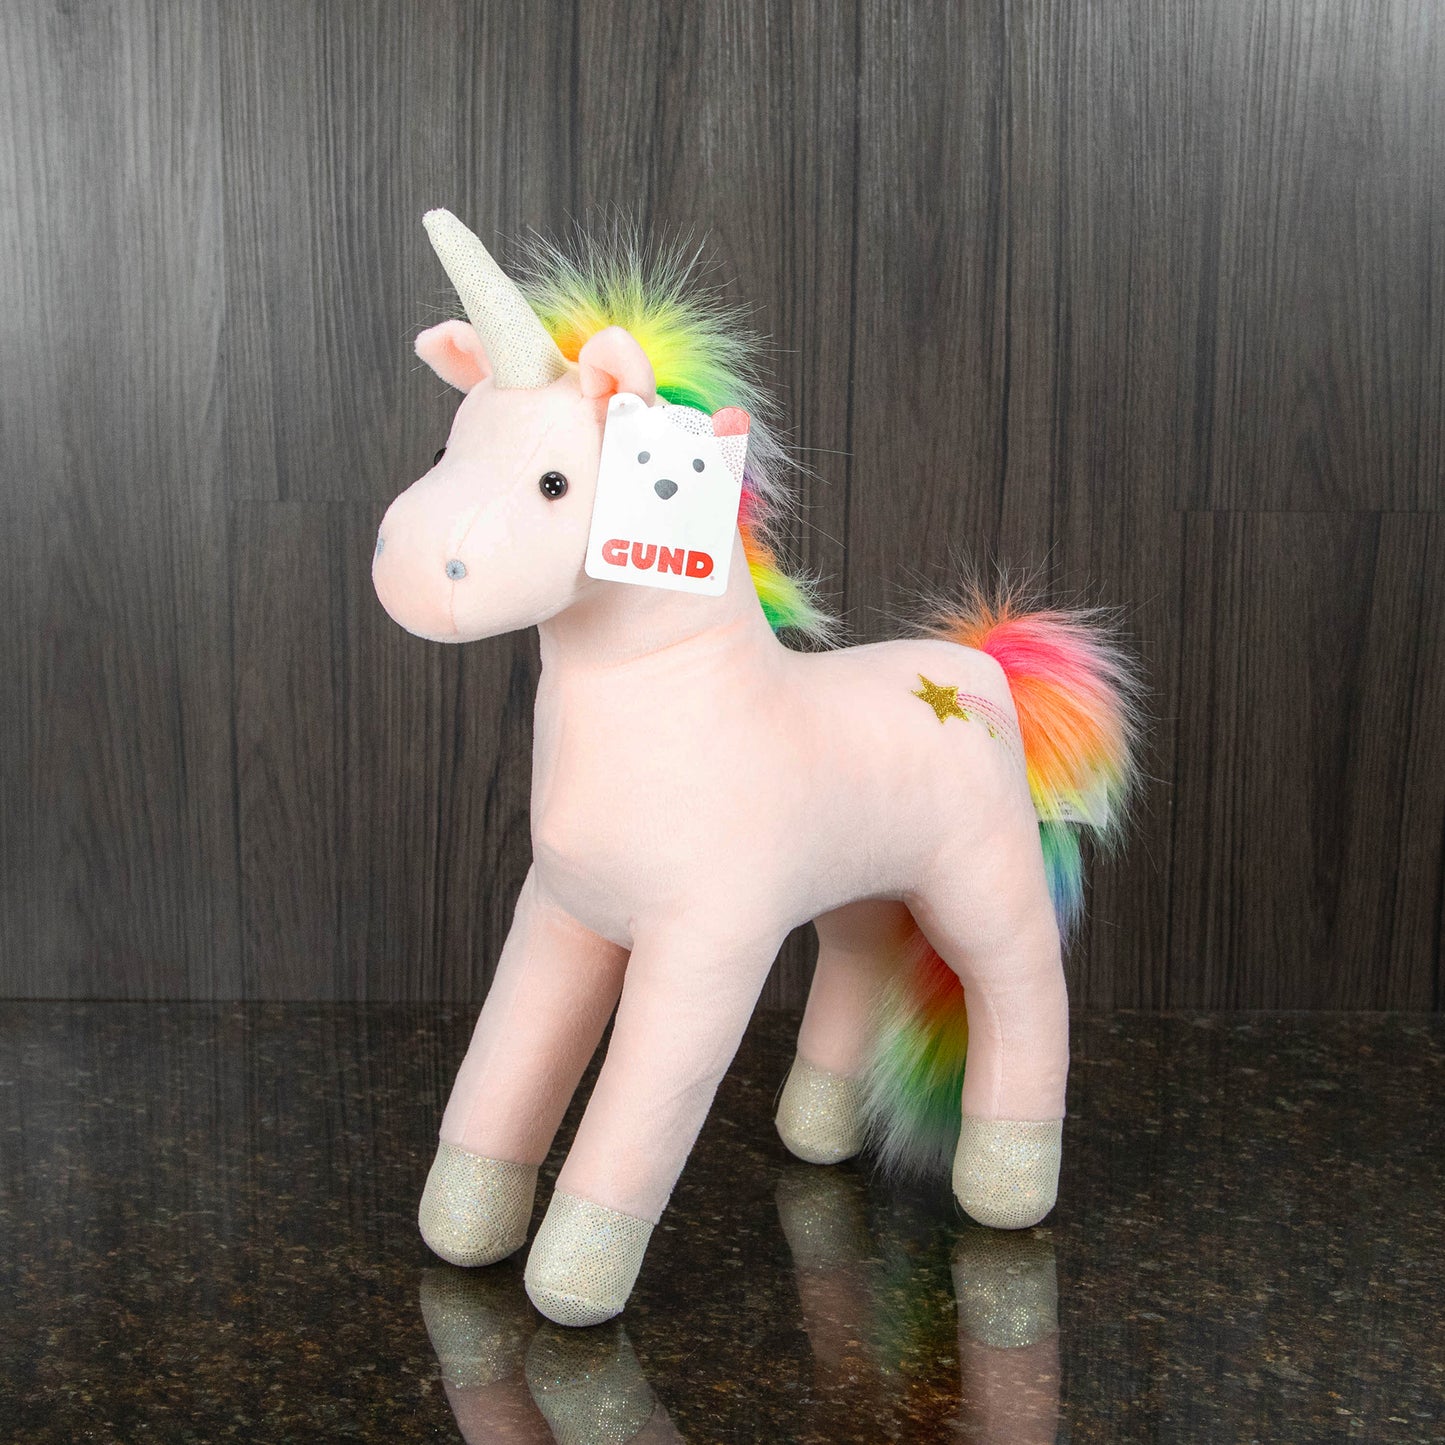 a unicorn stuffed animal with a light pink body and a rainbow mane and tail